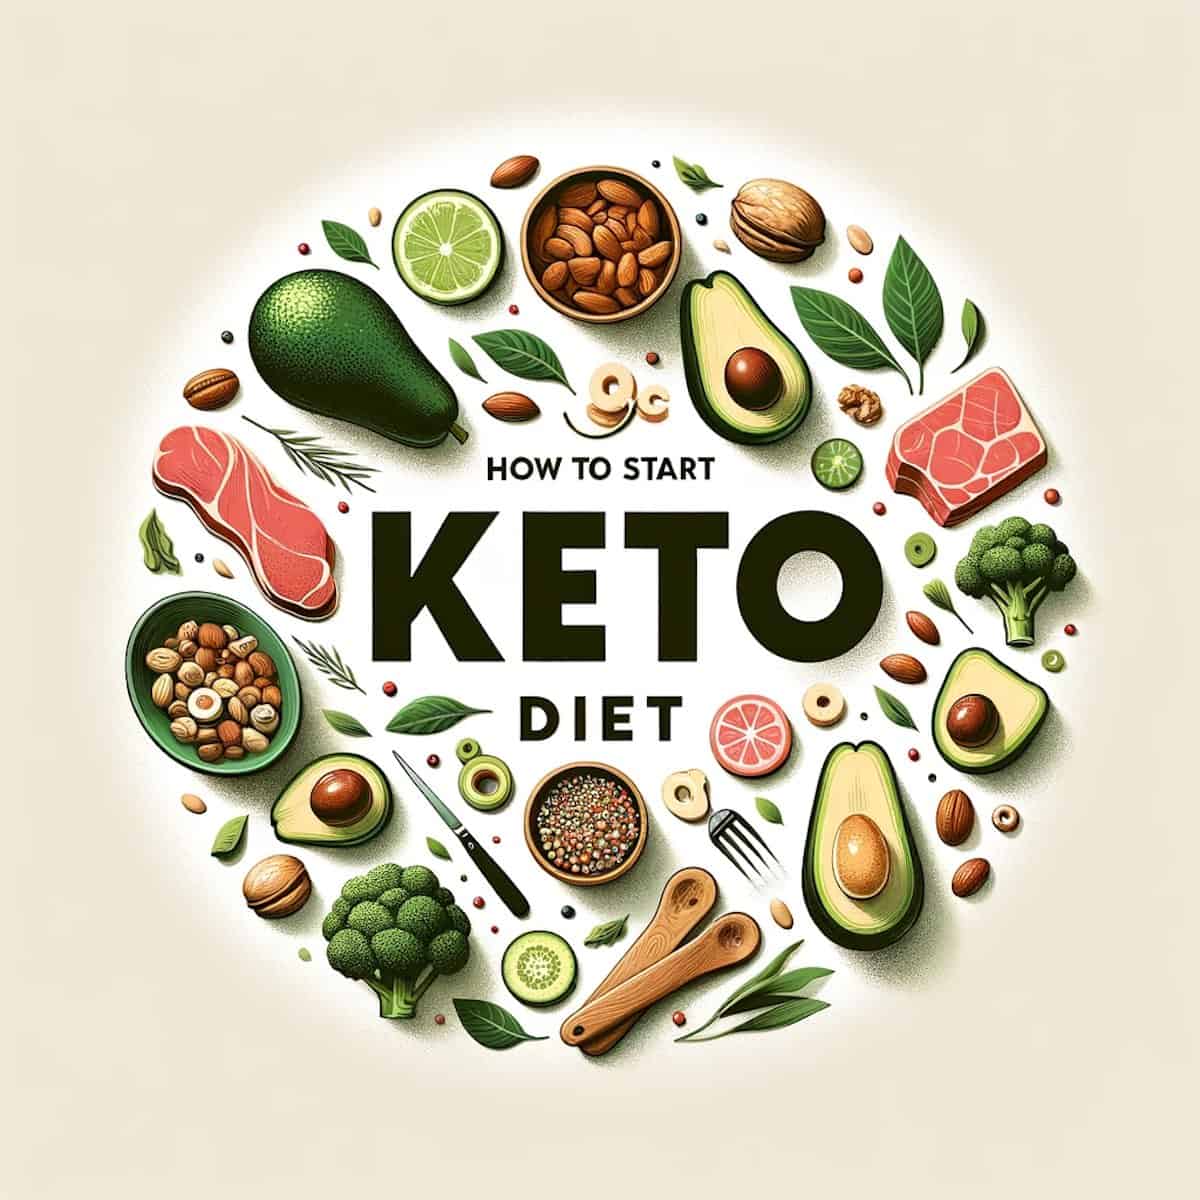 All the food suitable for a keto diet artfully presented.